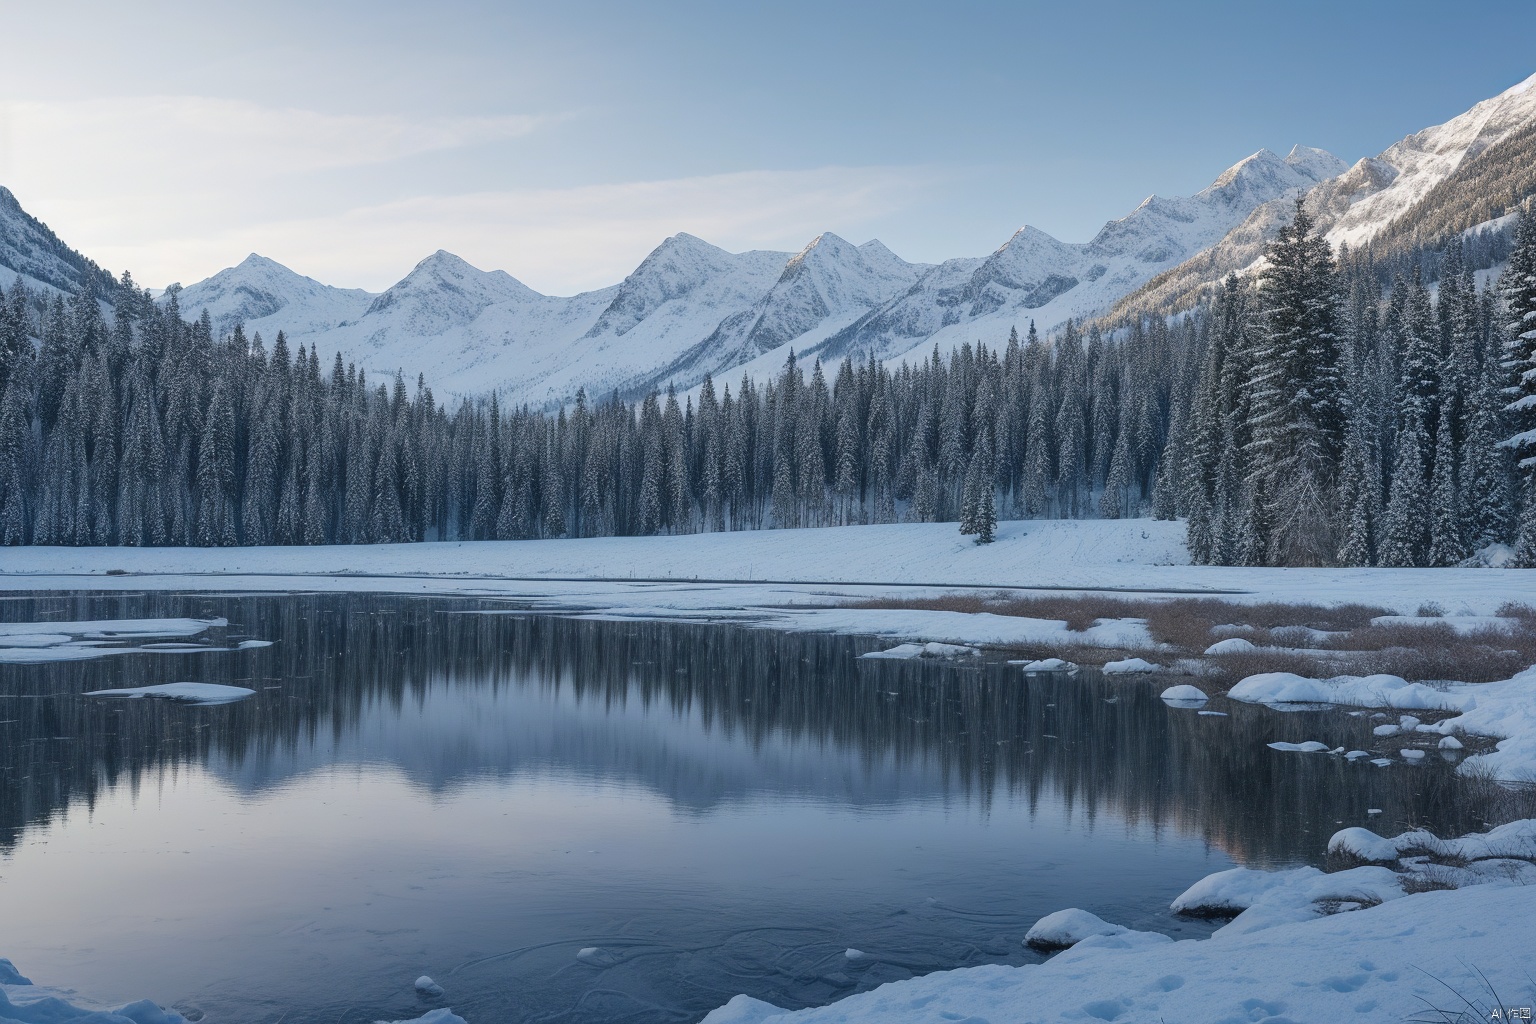 Snowy mountains with golden summits, bathed in warm light, overlooking an expansive blue lake reflecting the majesty of the snow-covered peaks.